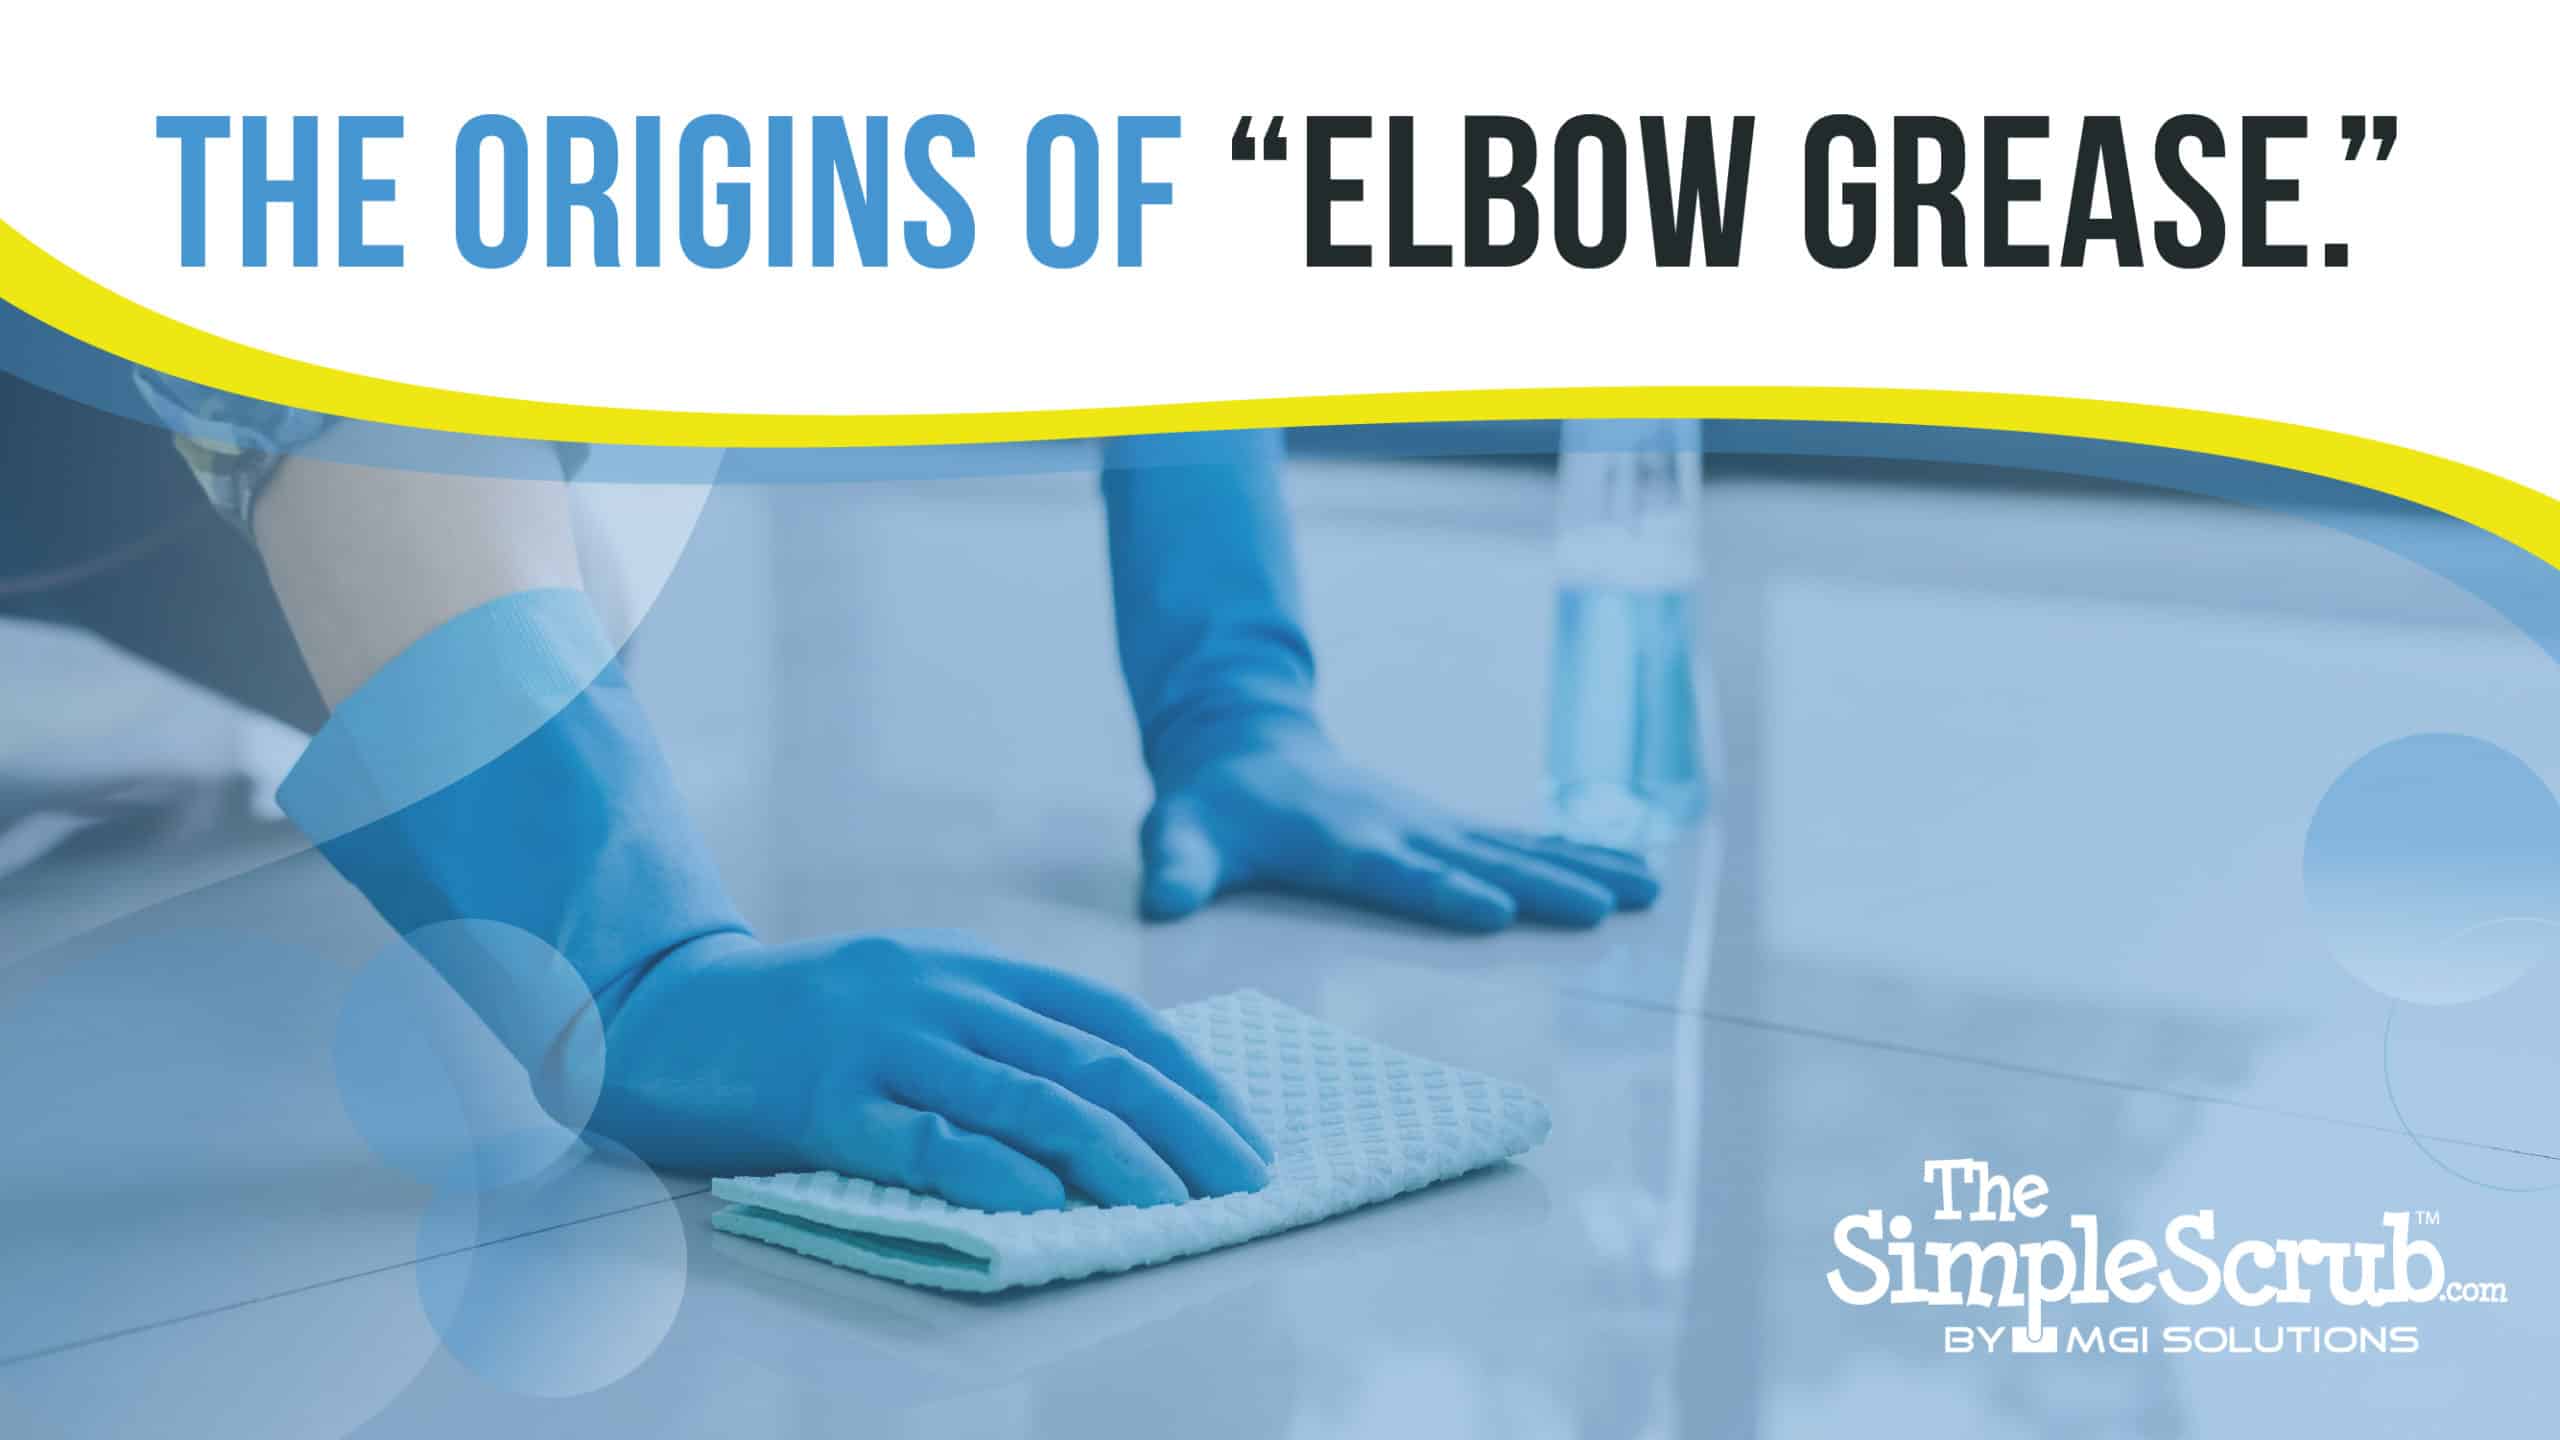 The Origins of “Elbow Grease” featured image